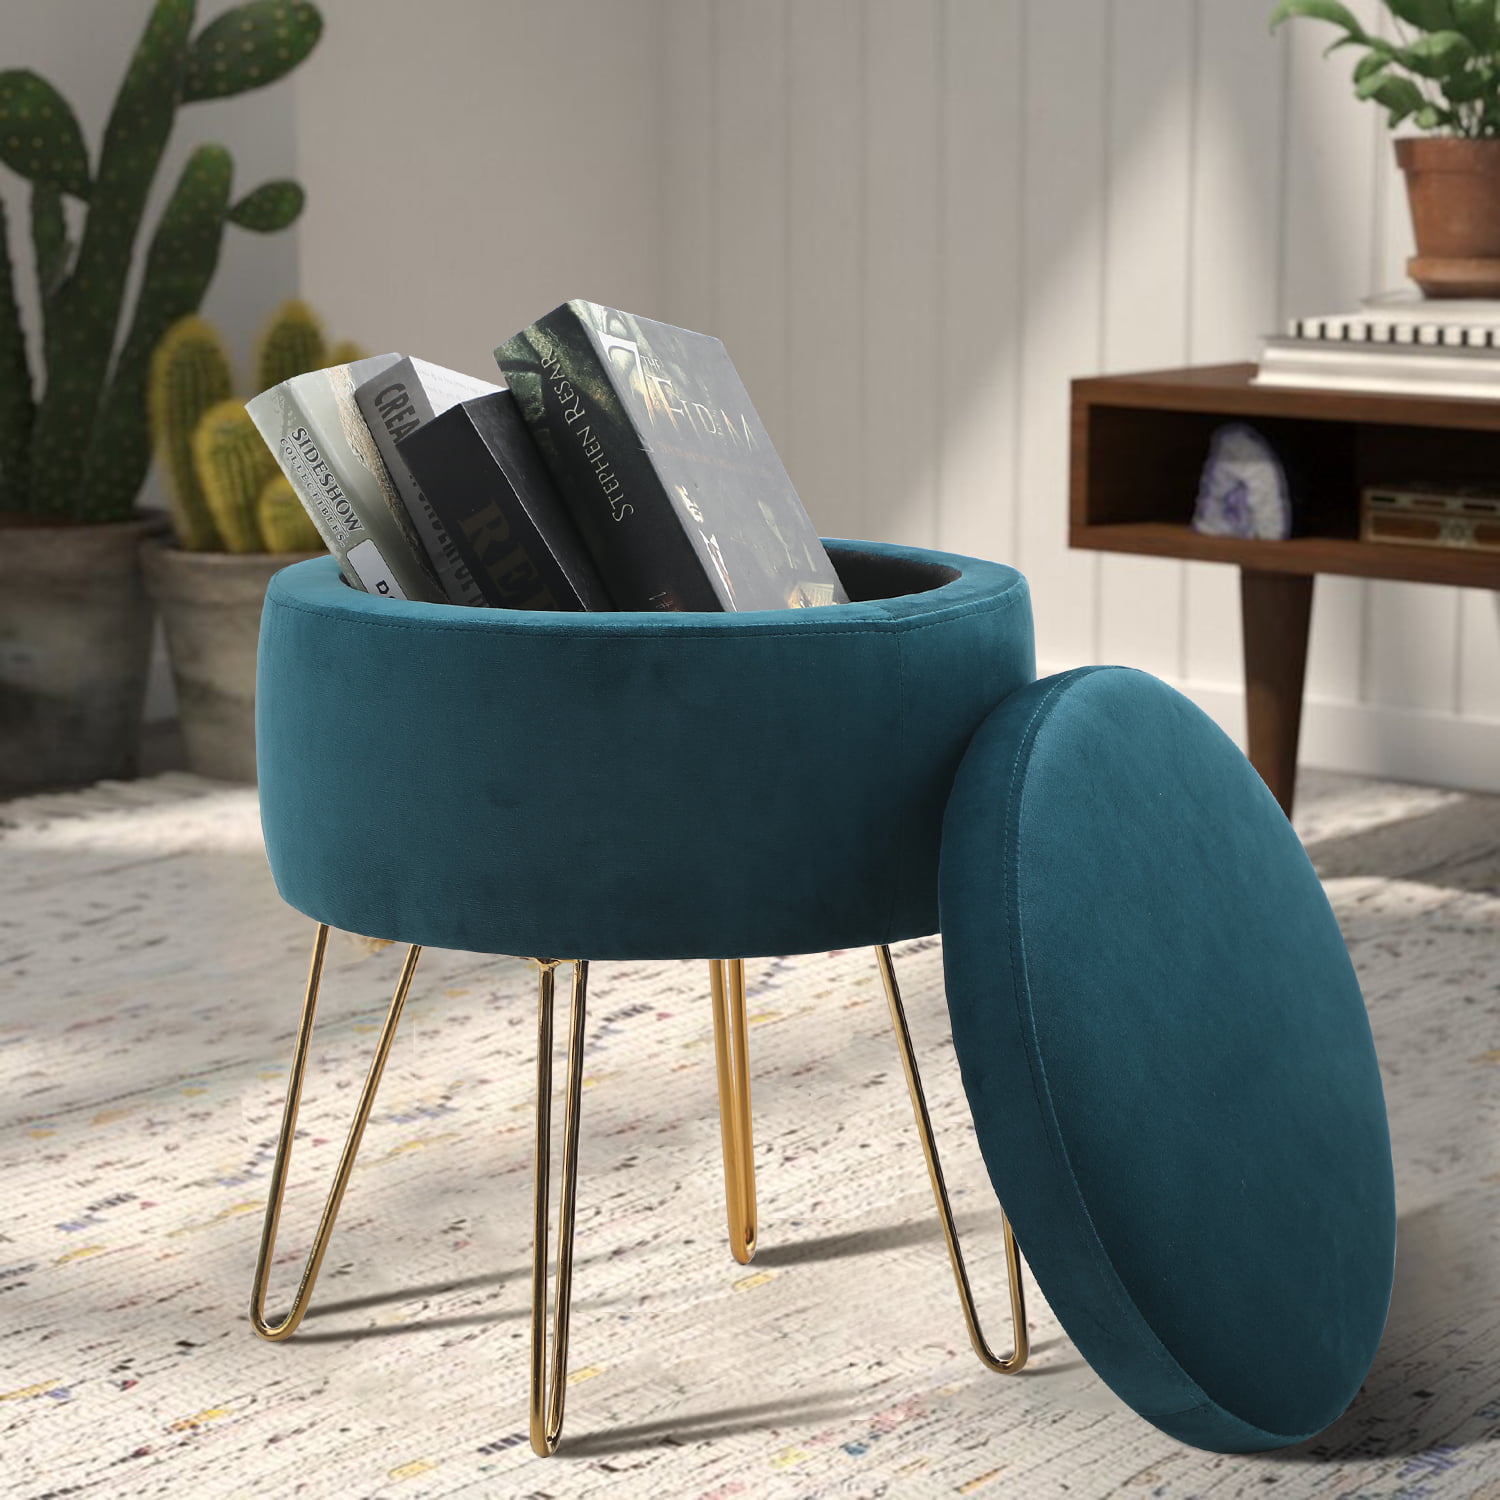 LSX--Ottomans Living Room Sofa Dressing Change Shoes Stool Upholstered Foot Stool Stool Foot Rest Small Pouf Storage Beanbag Footrest Ottoman Chair Linen Fabric Blue 30cmX30cmX35cm Storage 